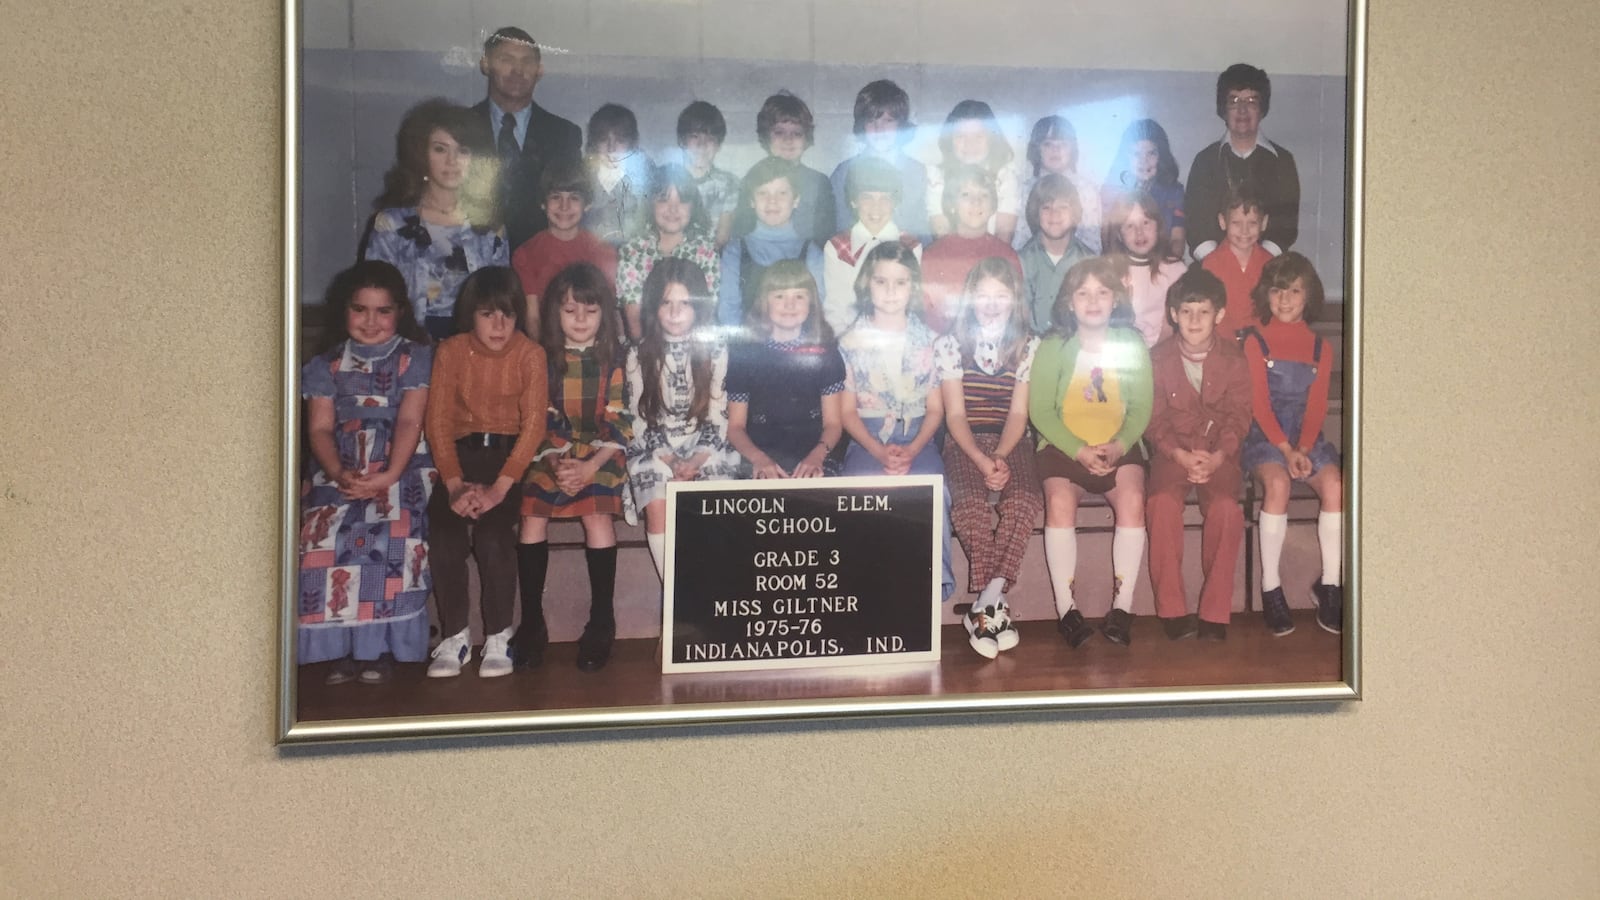 Before she became principal, Whitney Wilkowski attended Abraham Lincoln Elementary School in the mid-1970s. Pictured here is her third-grade class portrait, which hangs in her office.